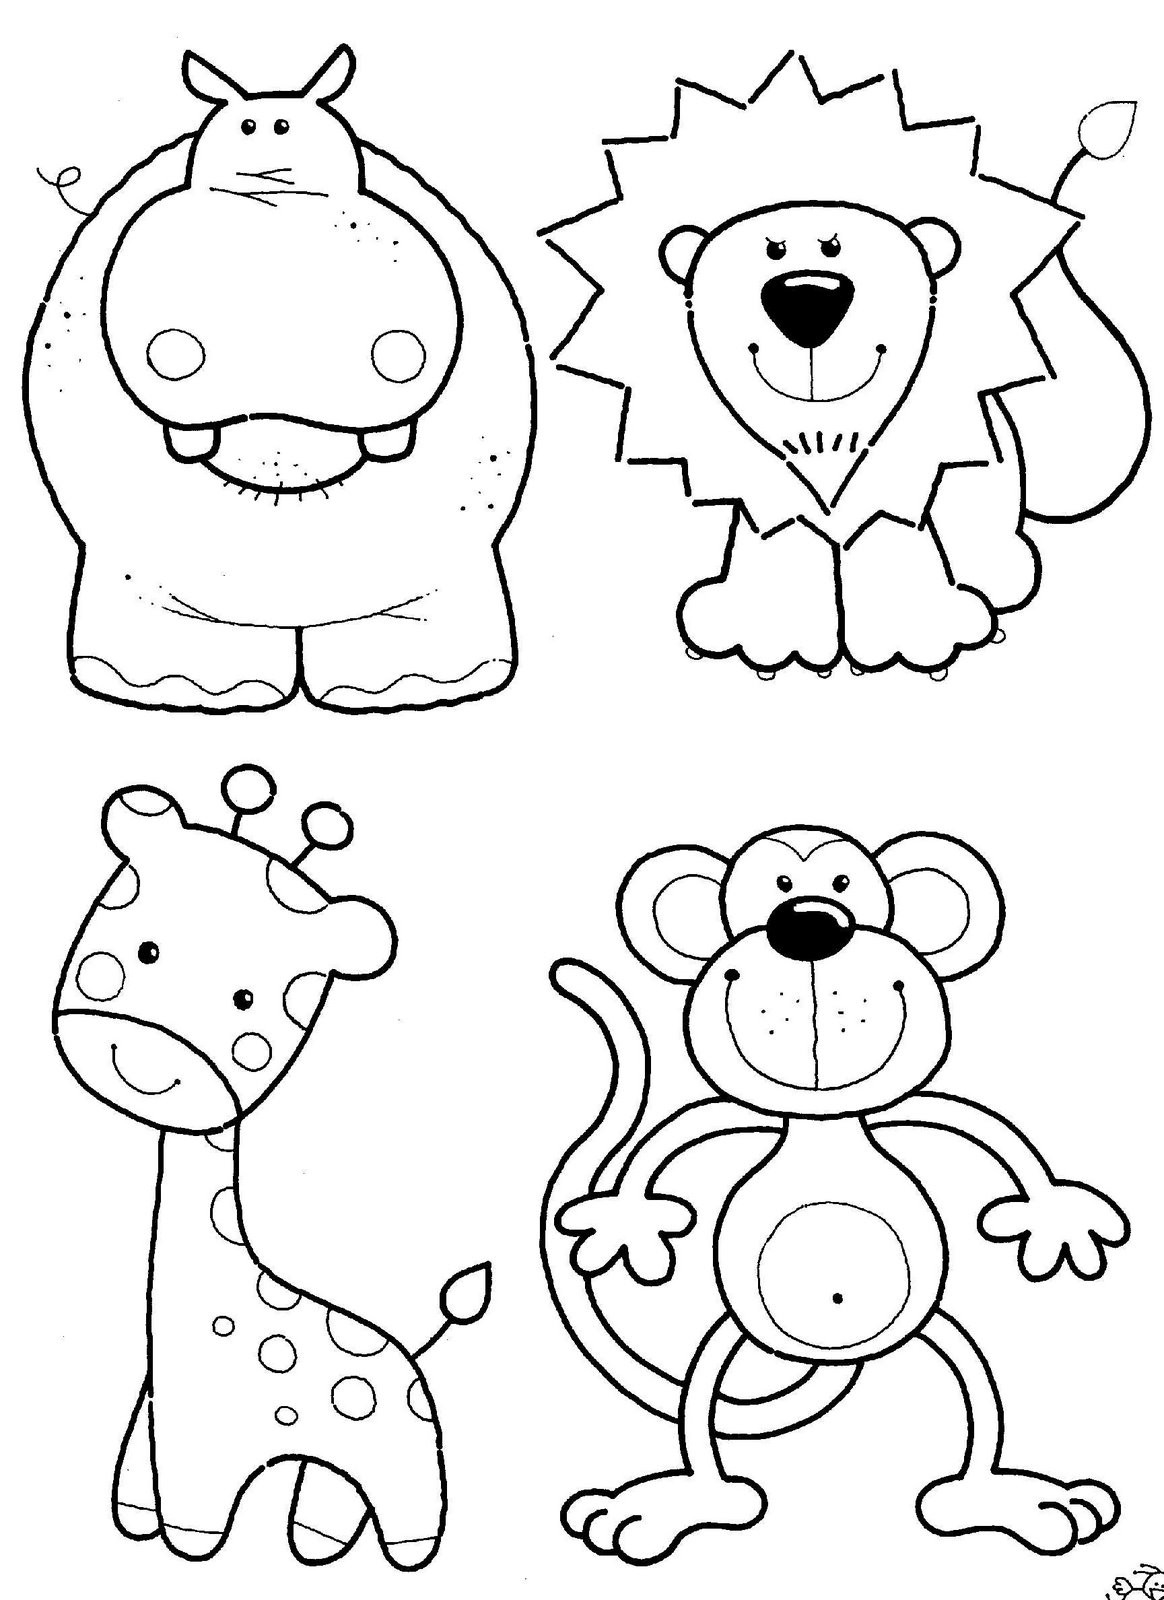 Animals Coloring Pages To Print
 Noah s Ark Preschool Lesson for 2 Year Olds